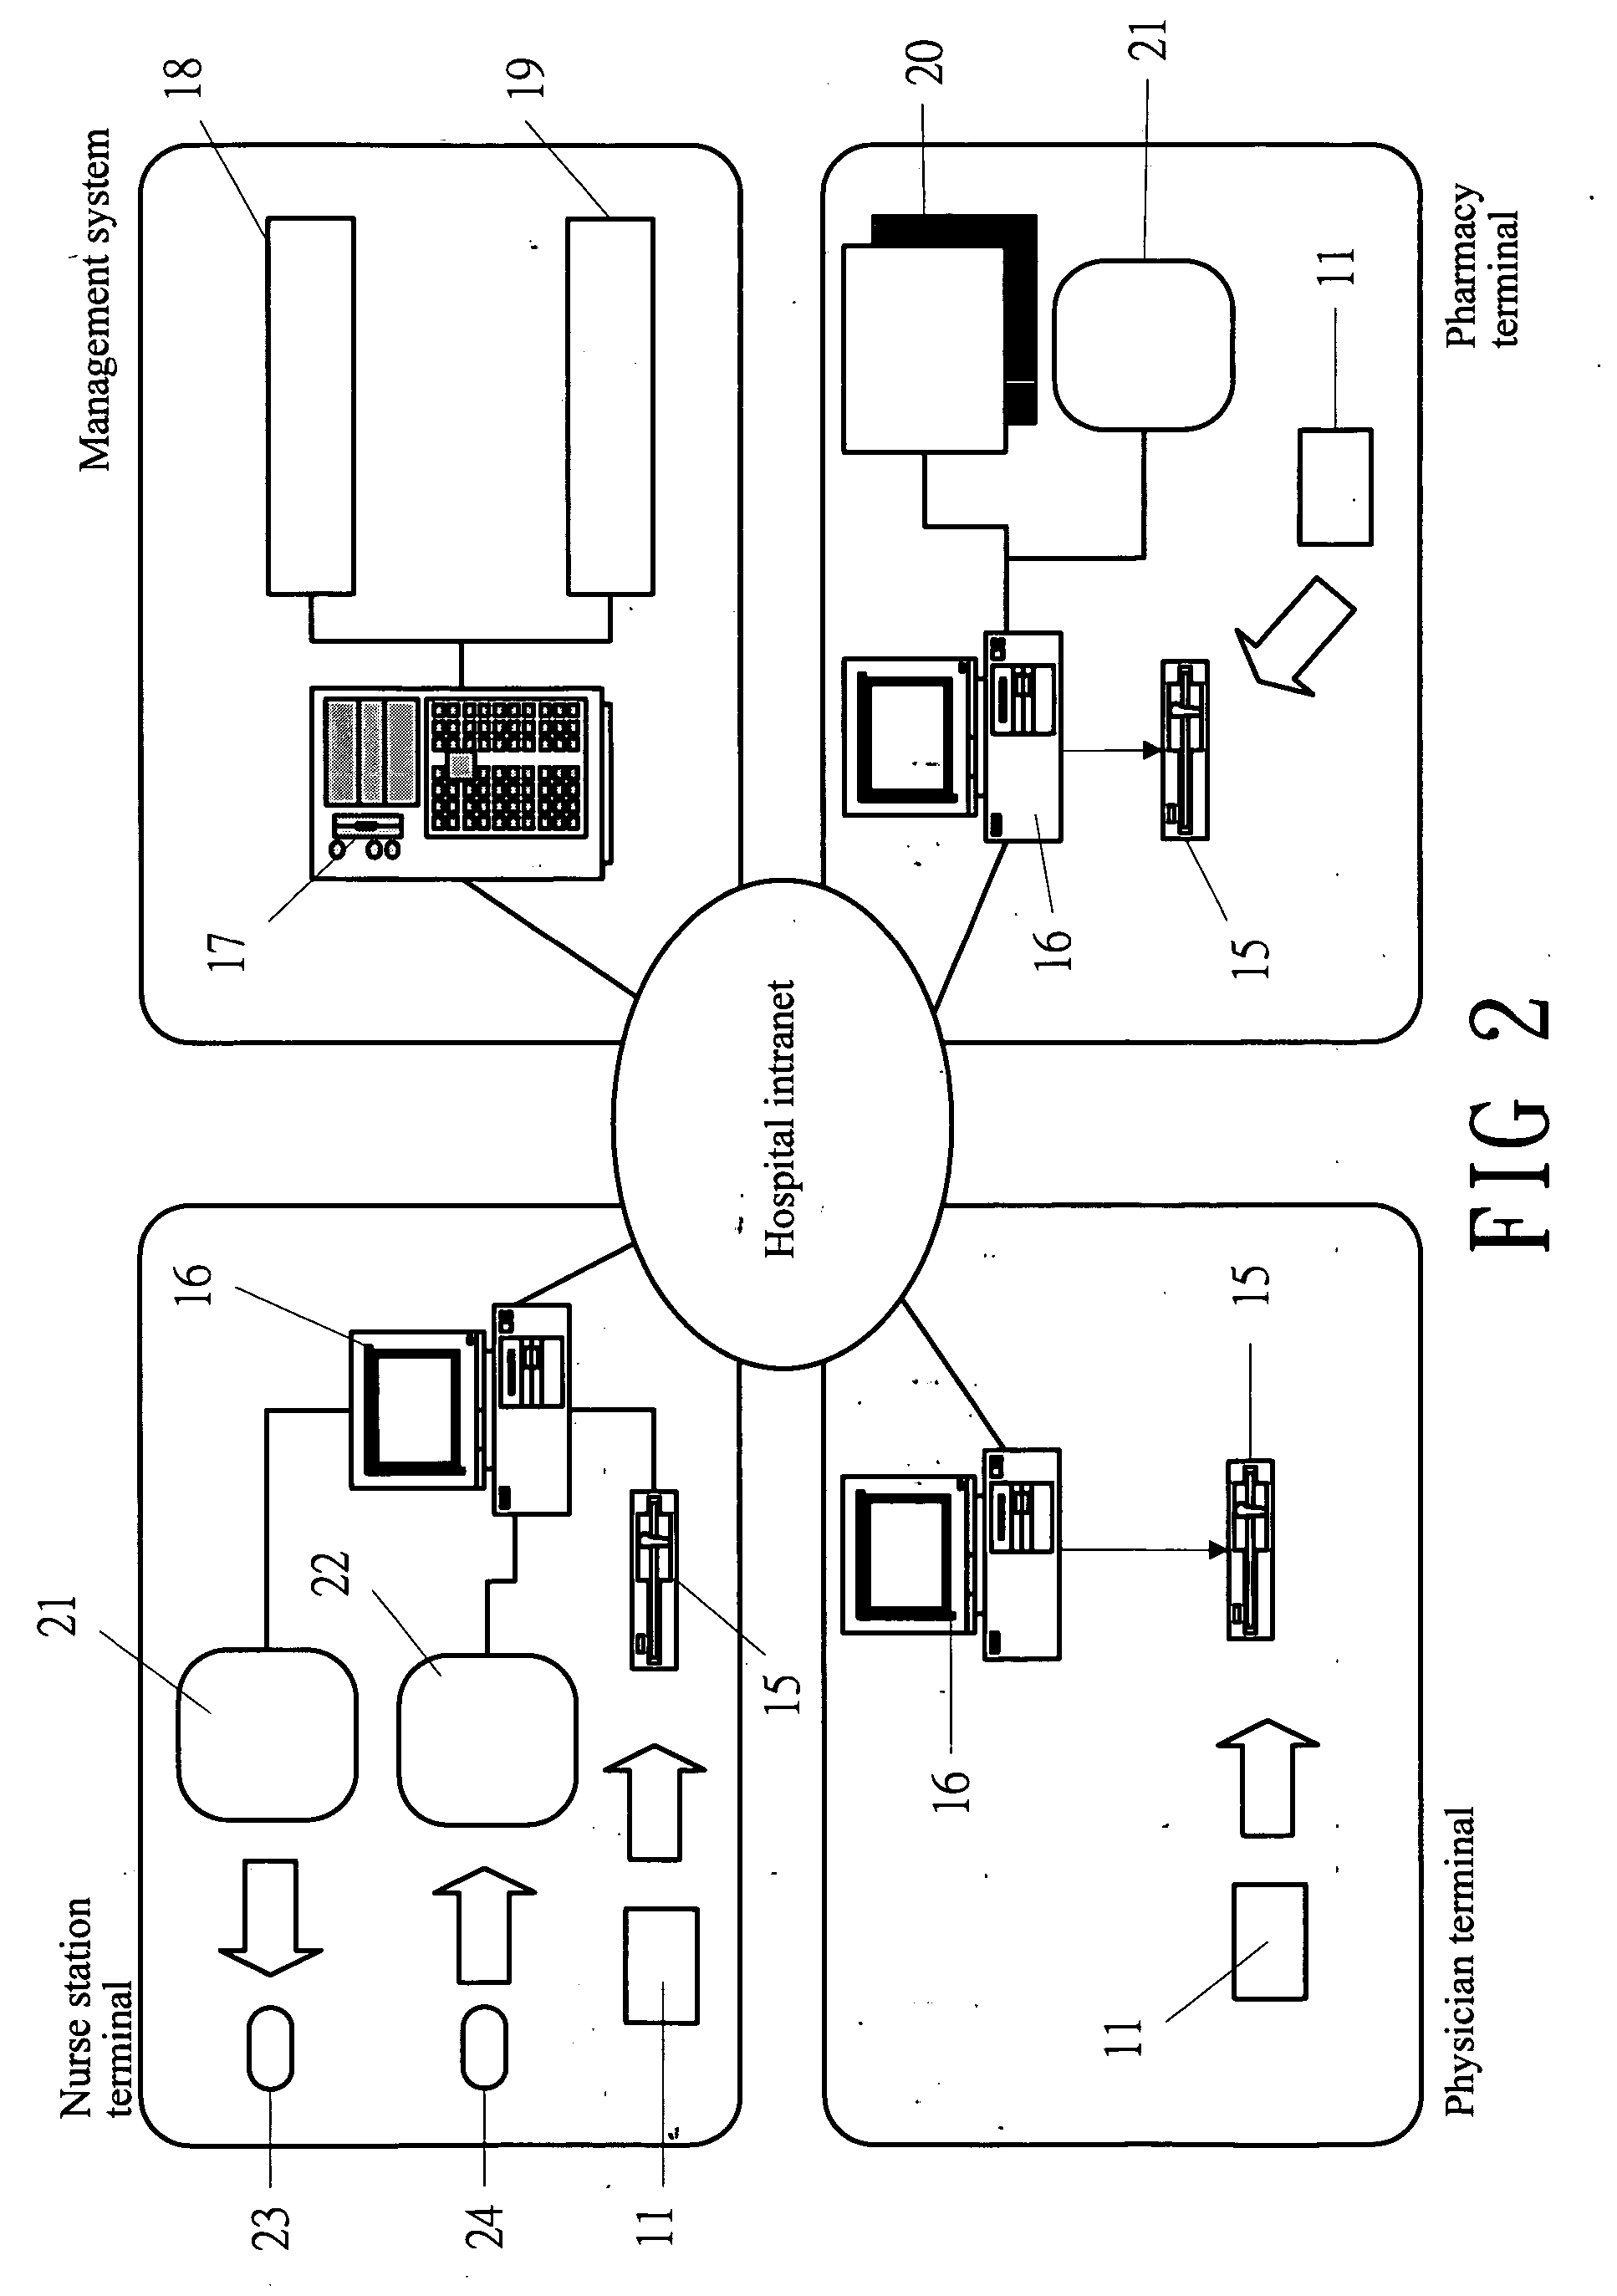 Means and method of applying RFID and PKI technologies for patient safety